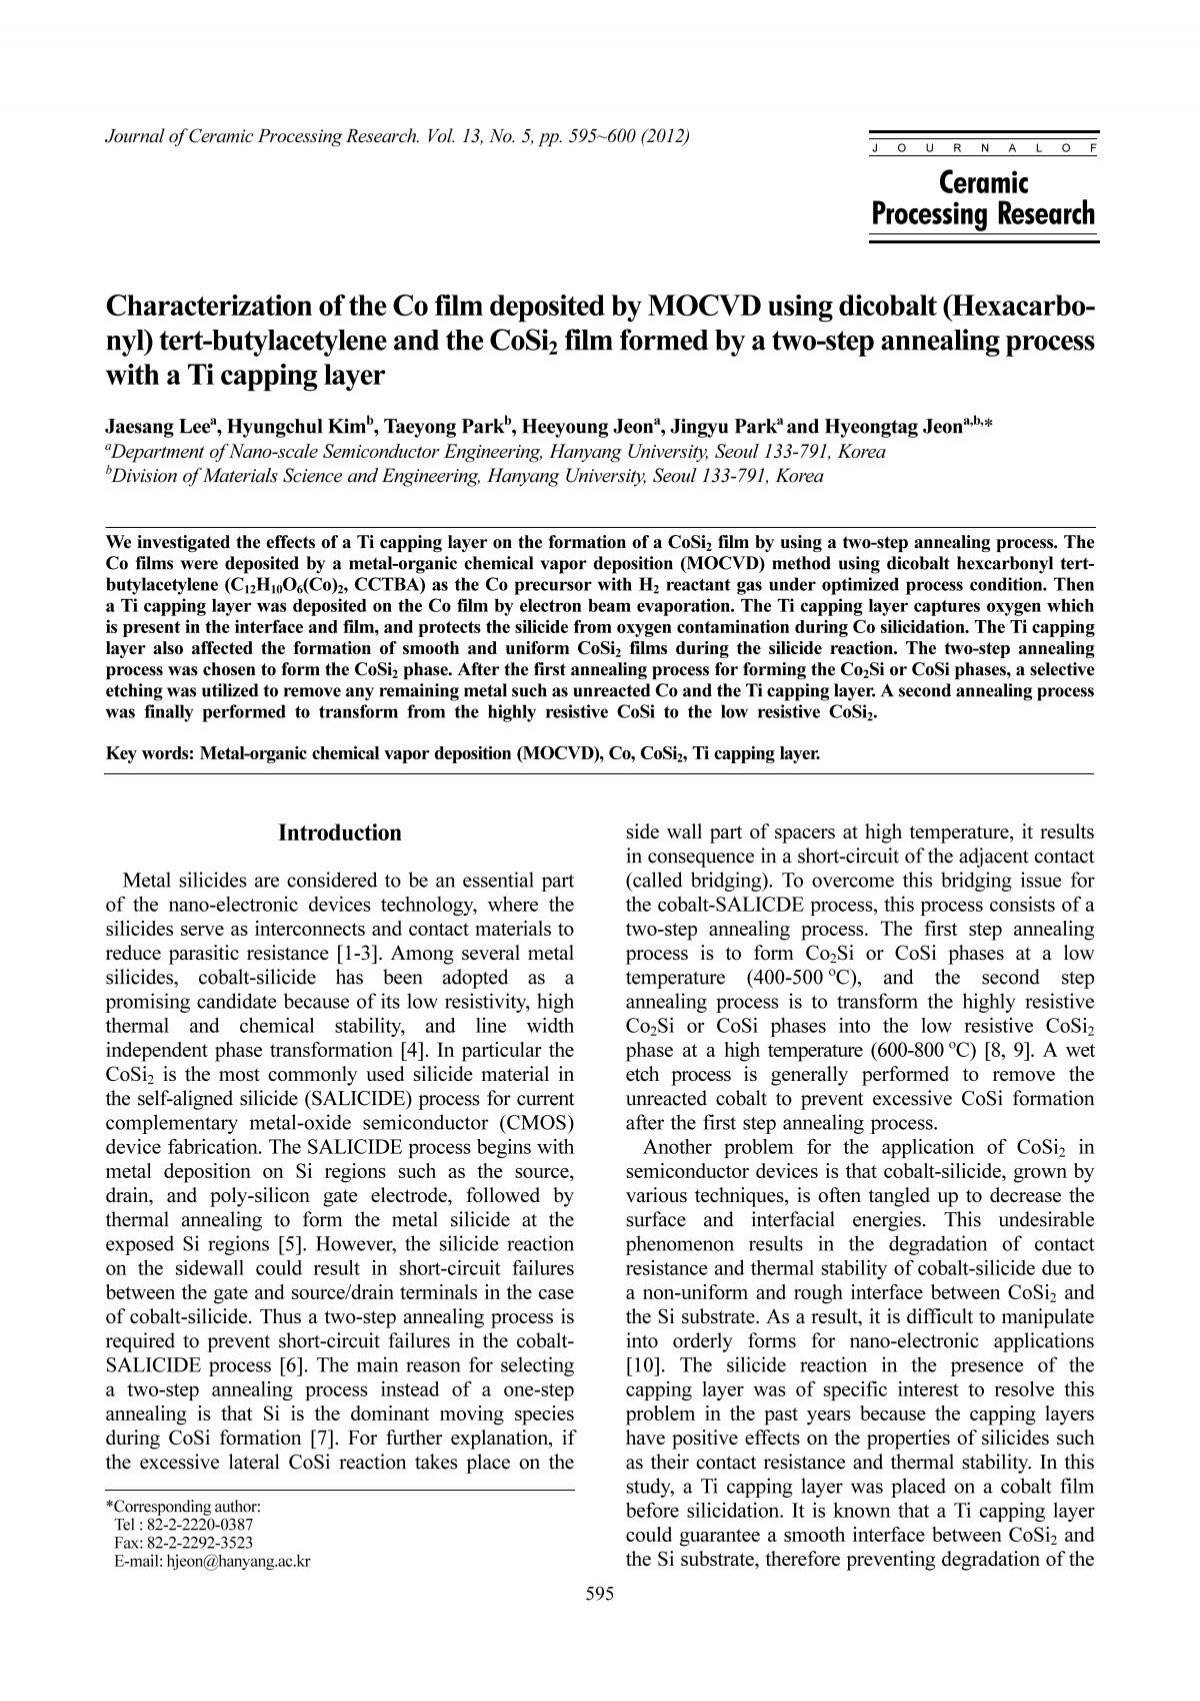 Characterization Of The Co Film Deposited By Mocvd Using Dicobalt